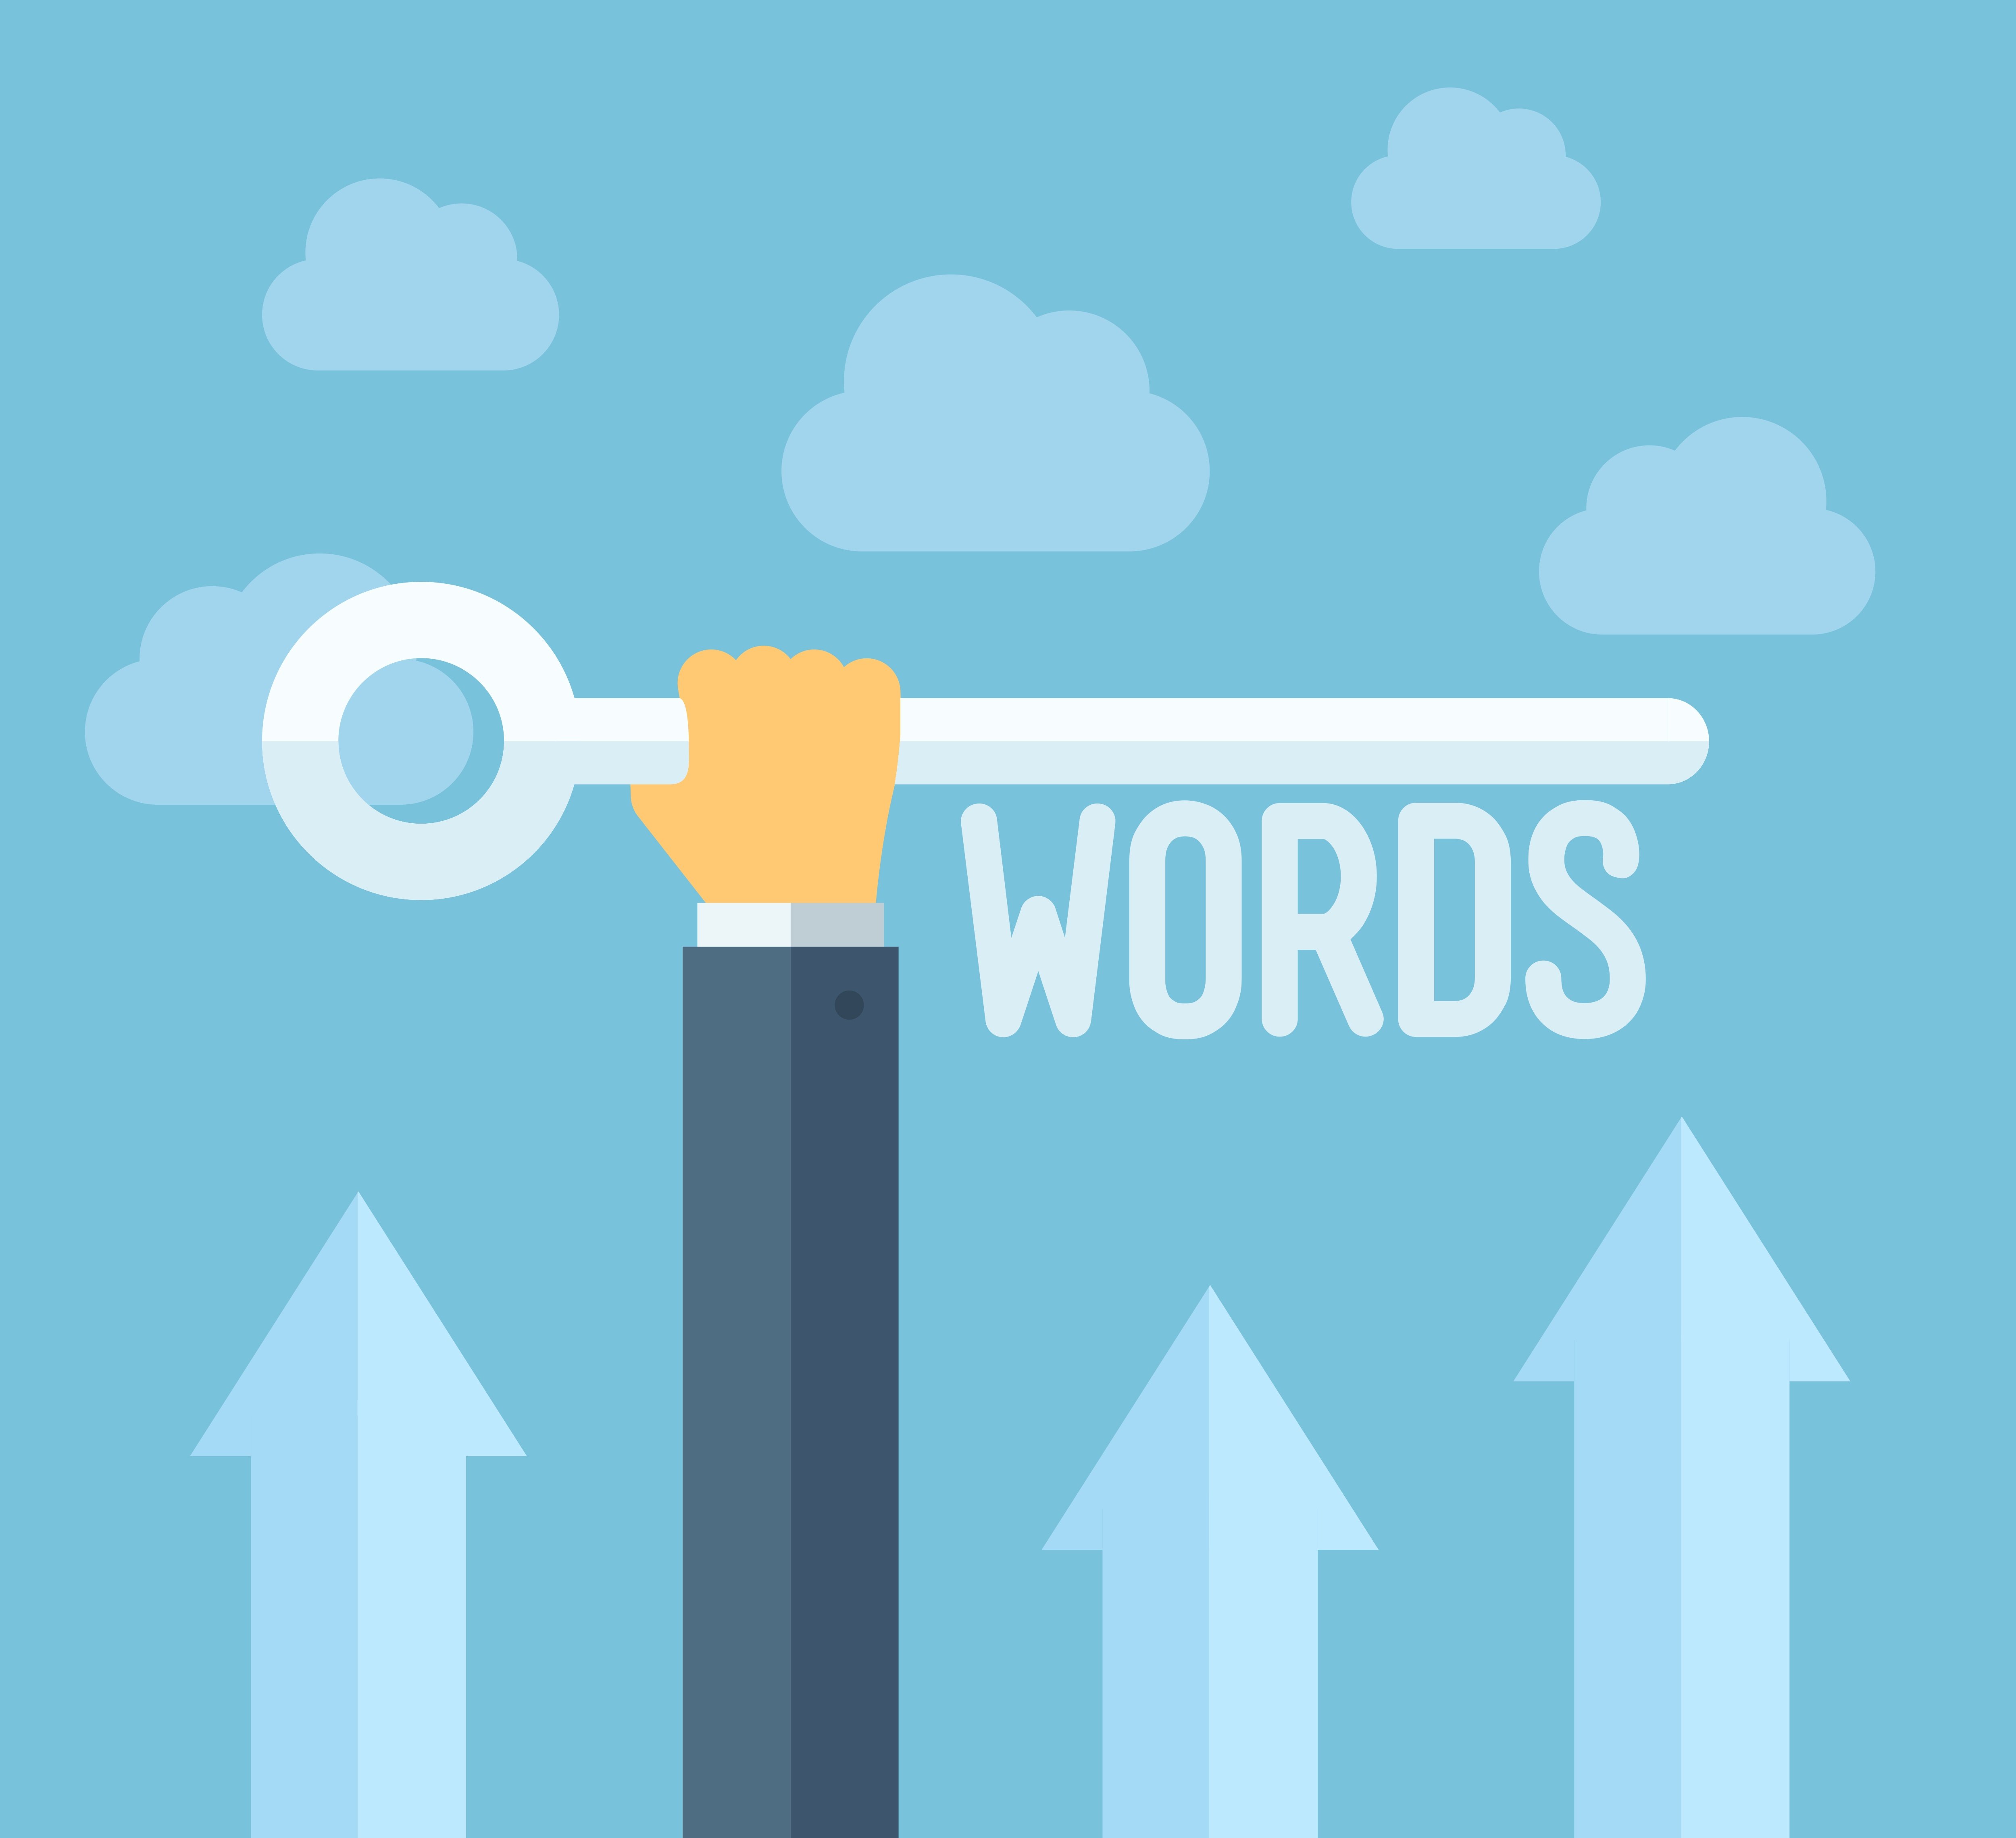 keyword-research-101-how-to-choose-the-right-keywords.jpg